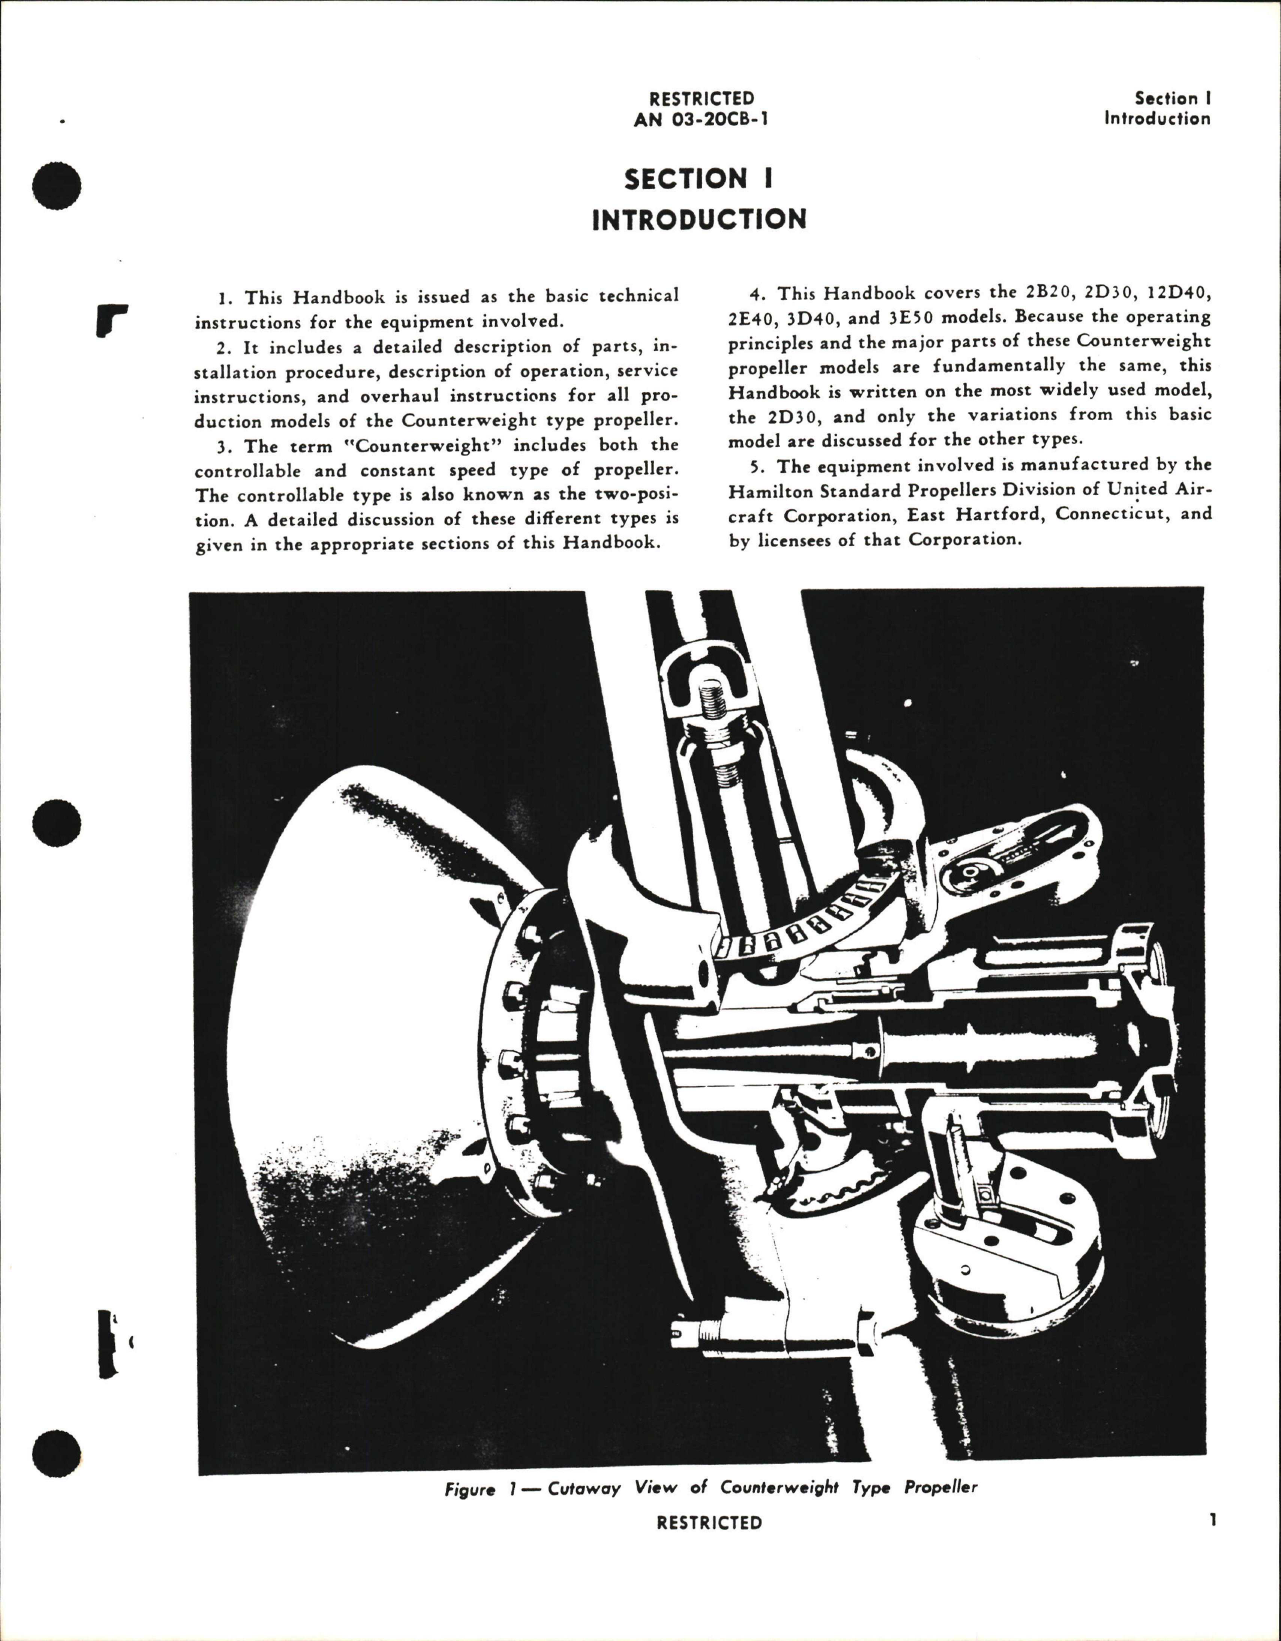 Sample page 5 from AirCorps Library document: Operation, Service, & Overhaul Instructions for Counterweight Props 2B20, 2D30, 2E40, 3D40, 3E50, & 12D40